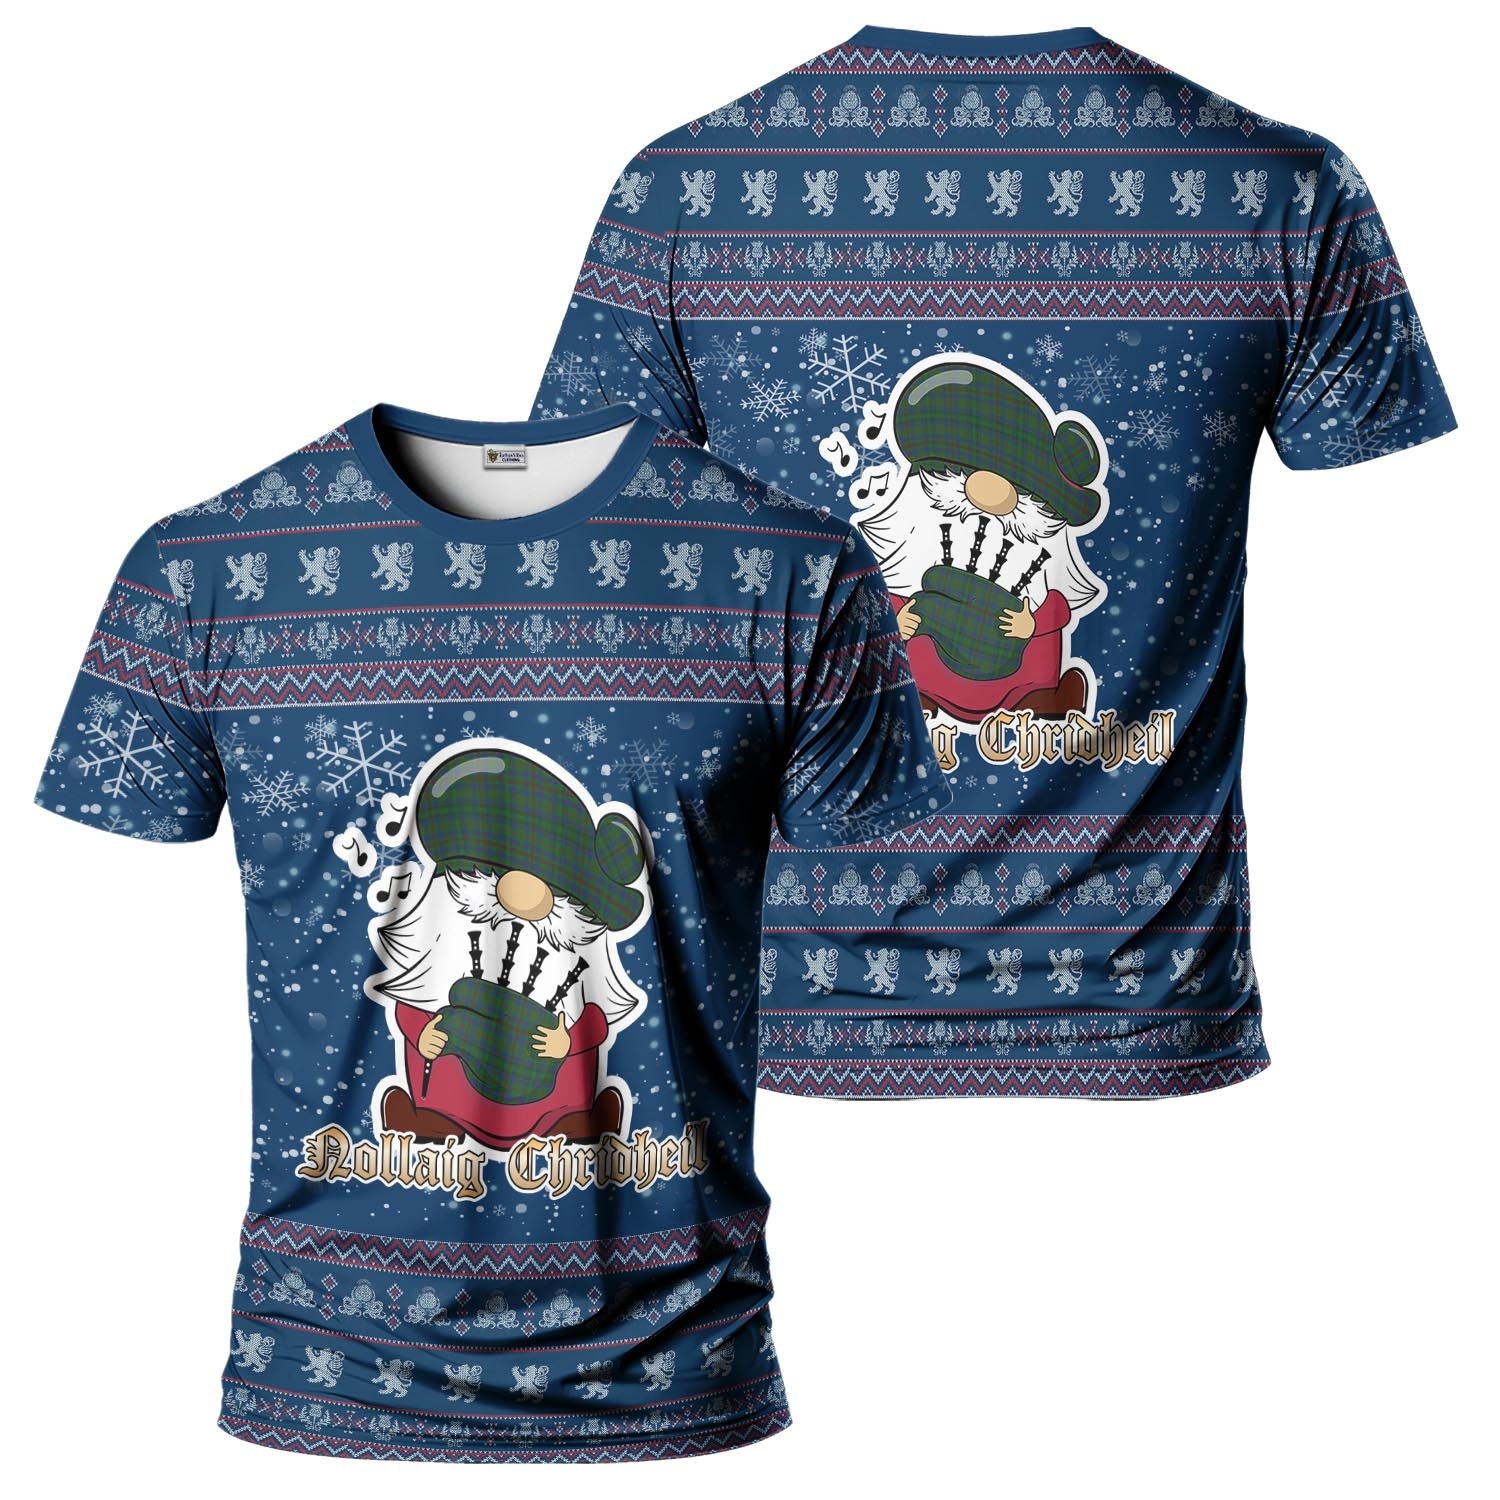 Moncrieff of Atholl Clan Christmas Family T-Shirt with Funny Gnome Playing Bagpipes Kid's Shirt Blue - Tartanvibesclothing